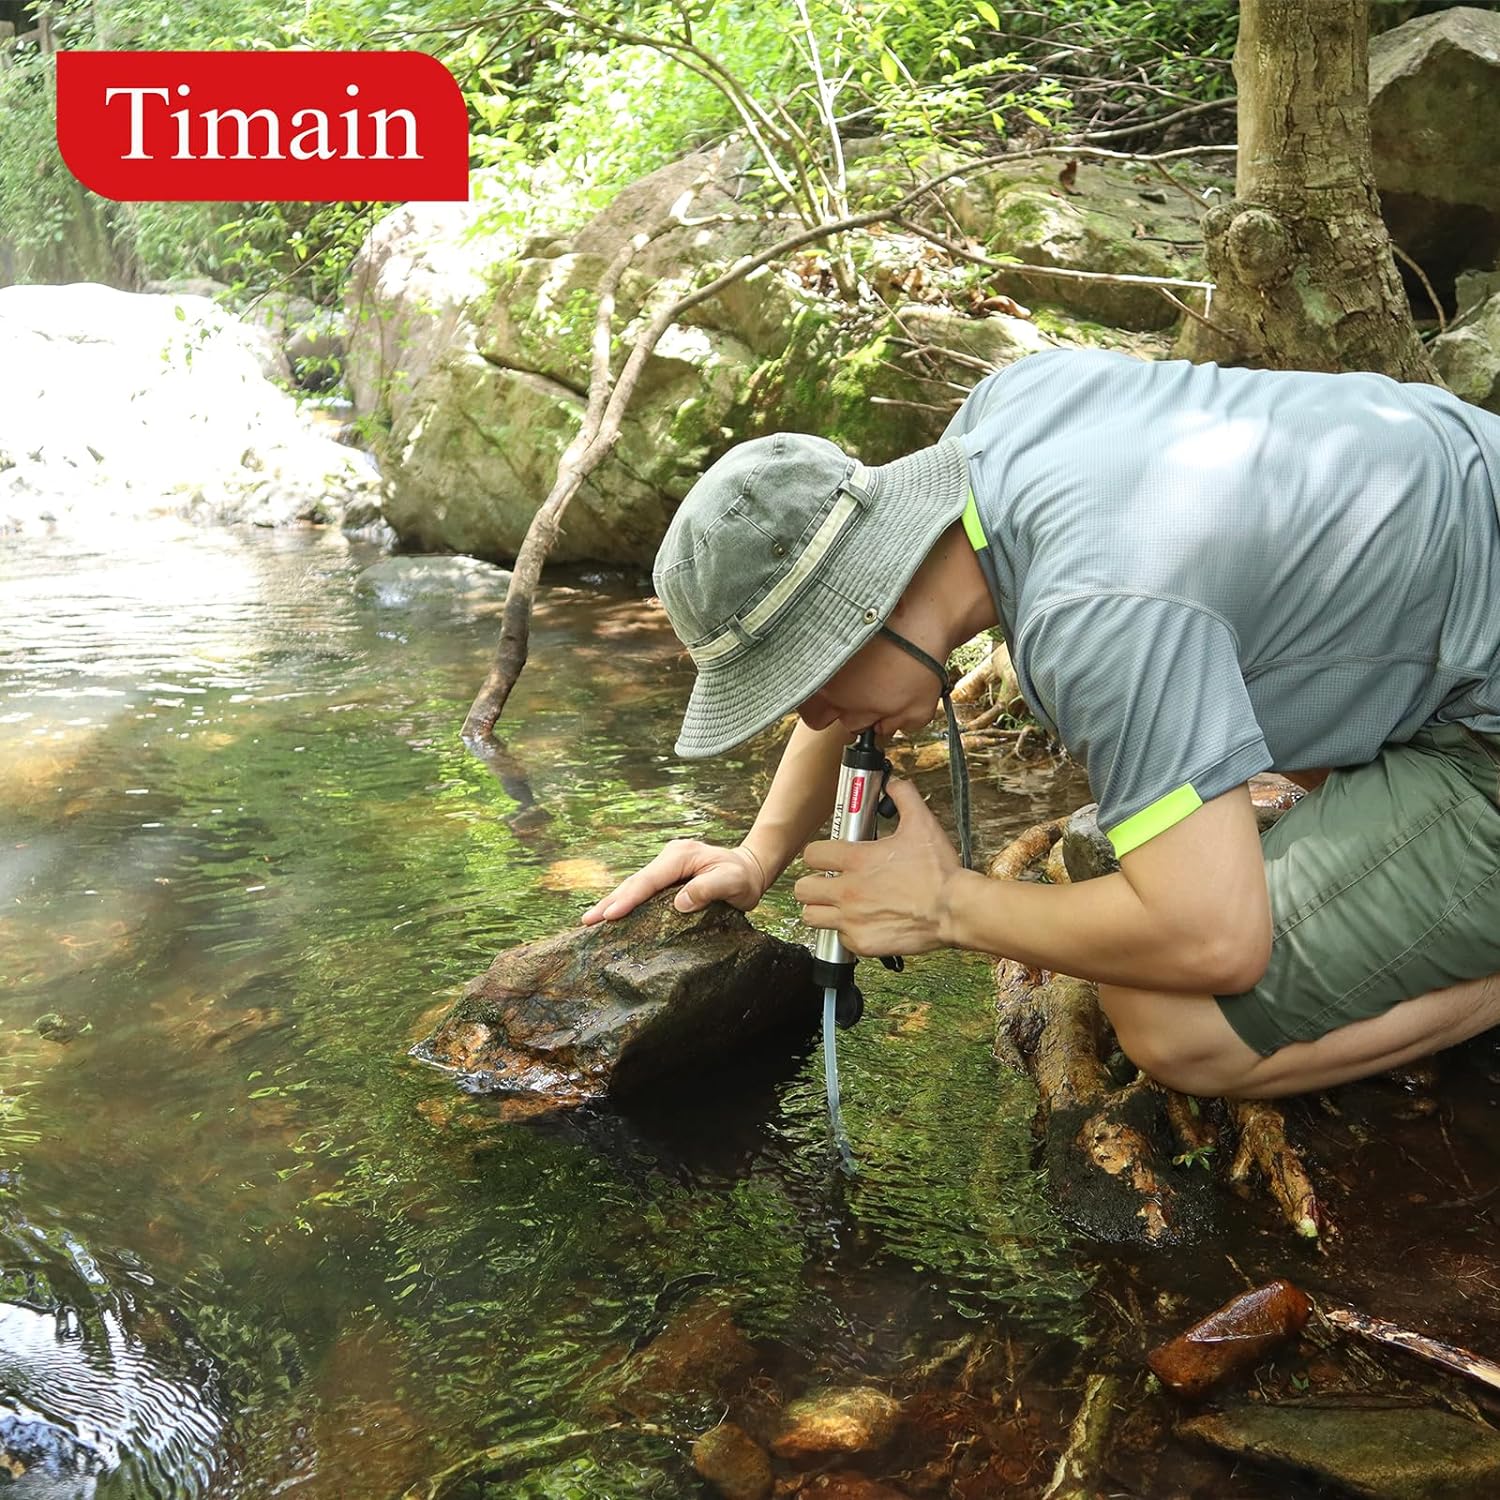 Obtain Clean Drinking Water Anywhere with the Timain Filter Straw